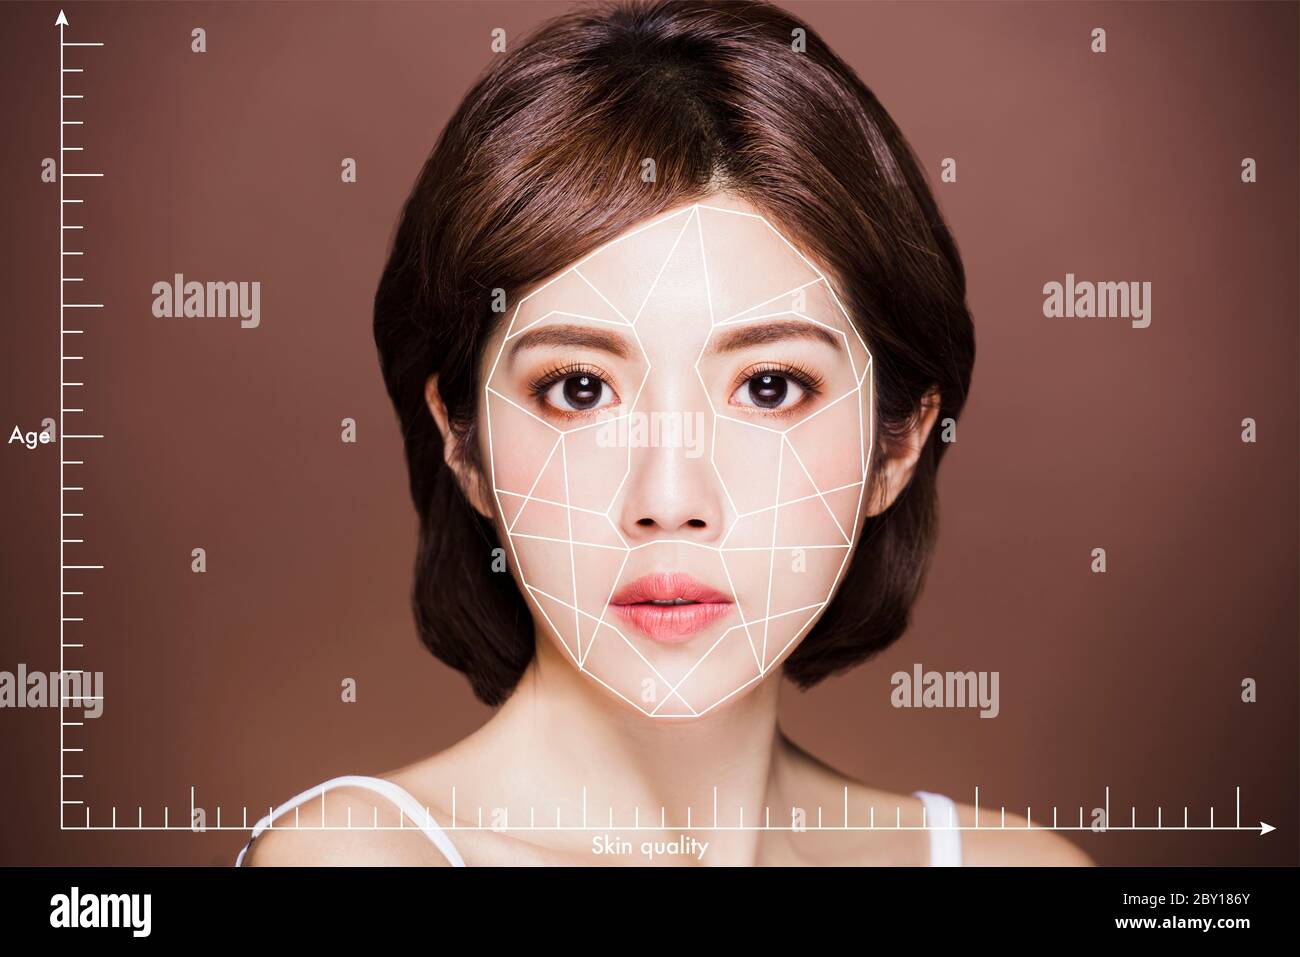 cyoung beauty and Plastic surgery, skin lifting, cosmetics medicine concept Stock Photo